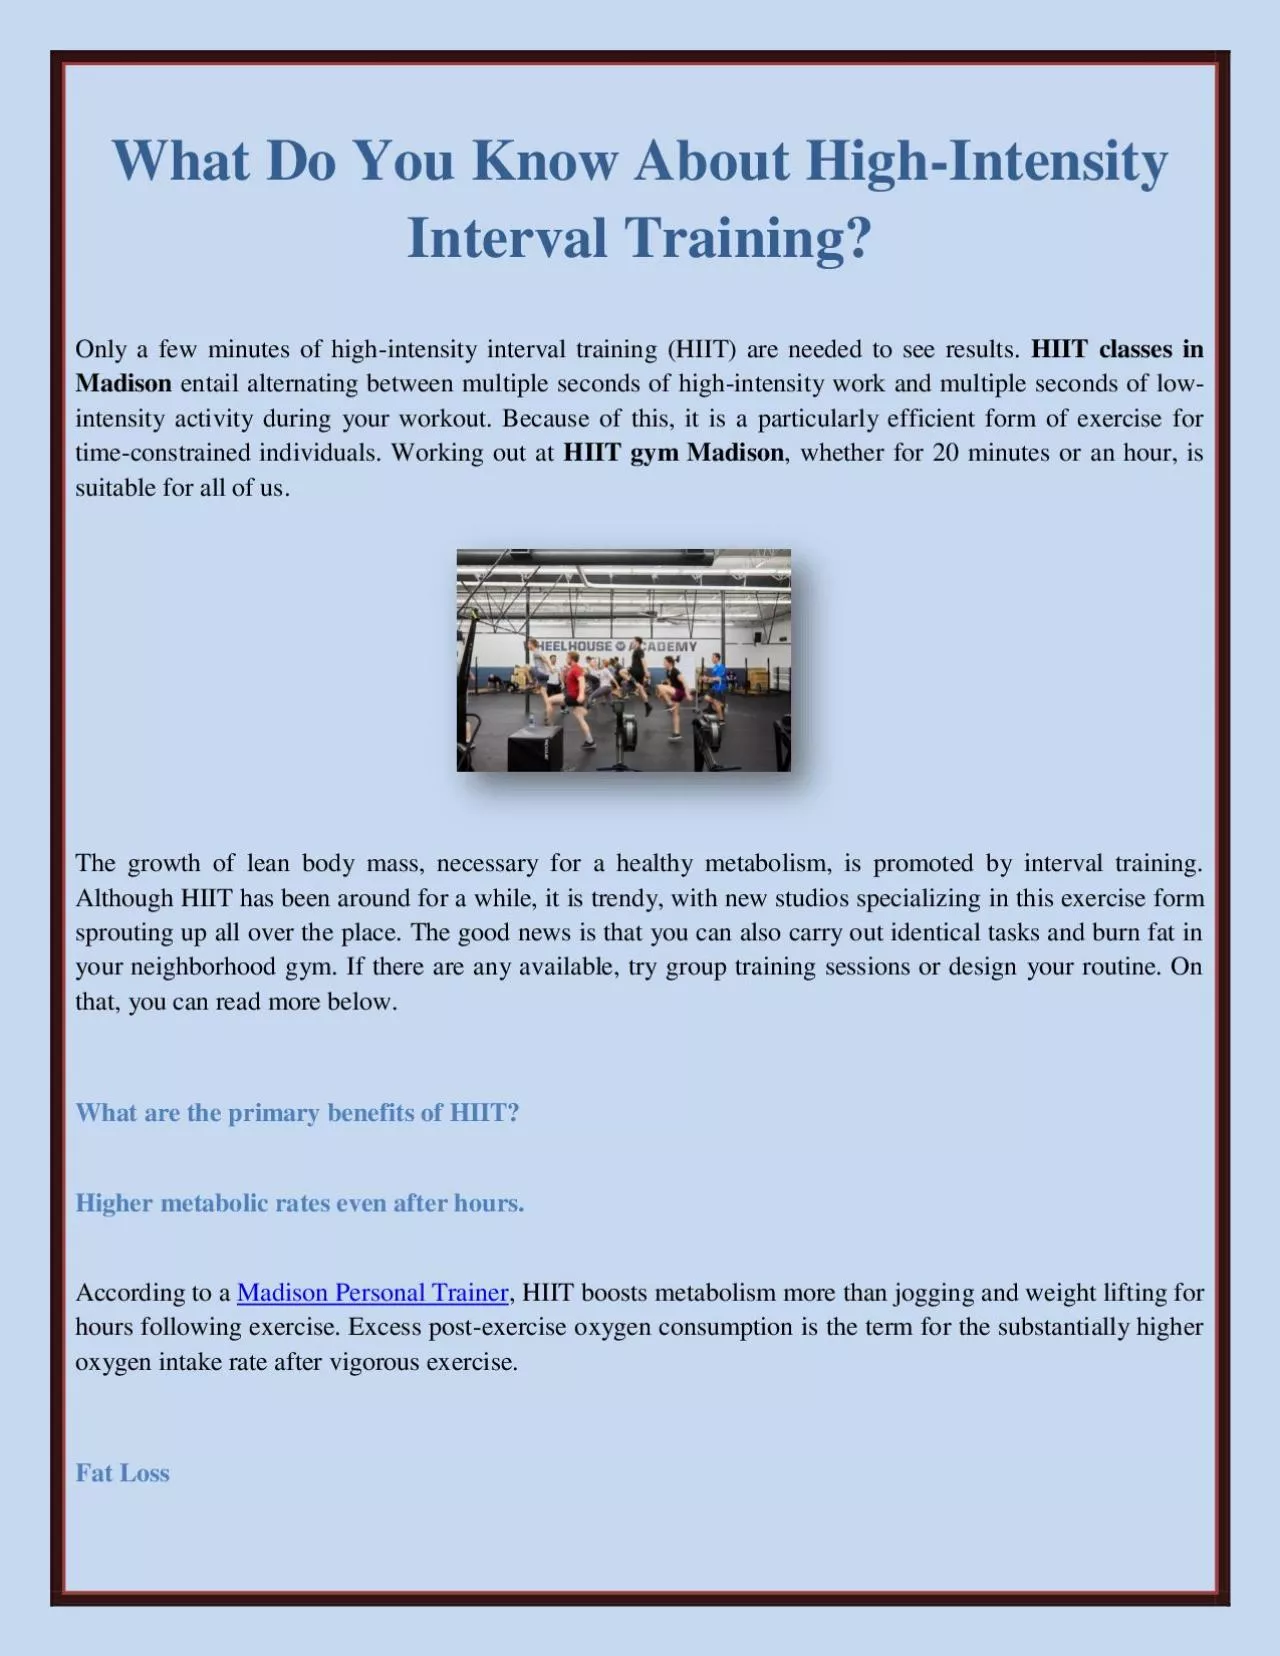 What Do You Know About High-Intensity Interval Training?